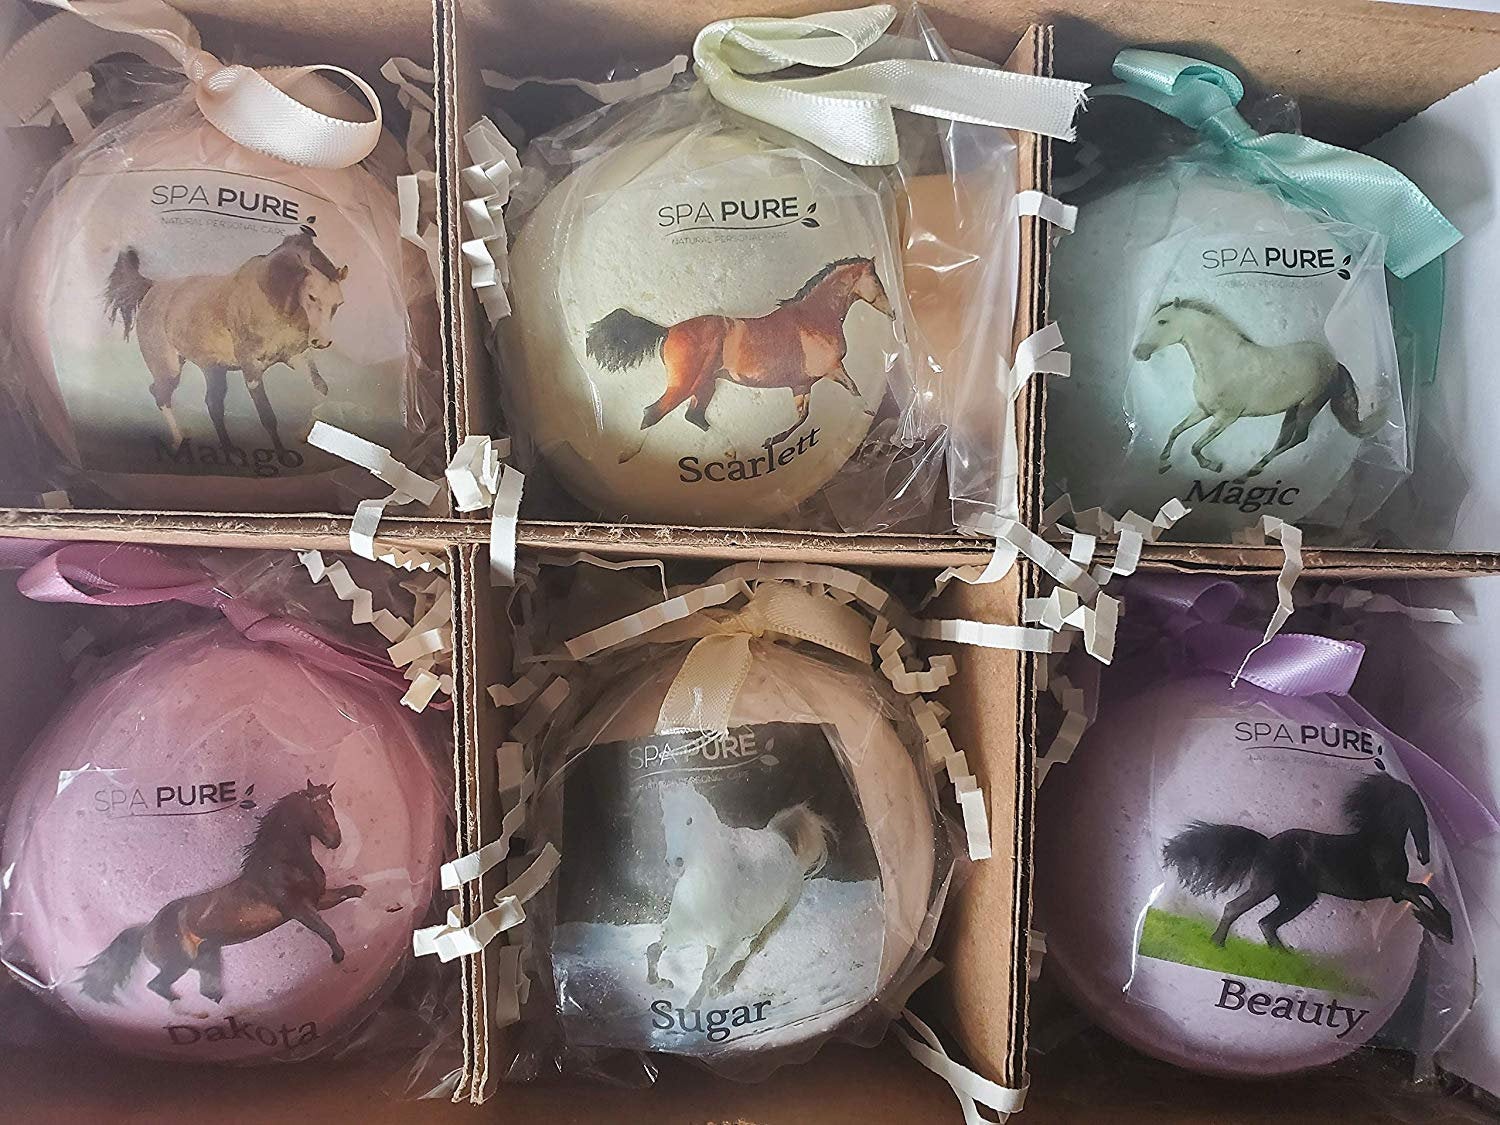 Spa Pure WILD HORSES Bath Bombs: for kids with 6 XL bath bombs